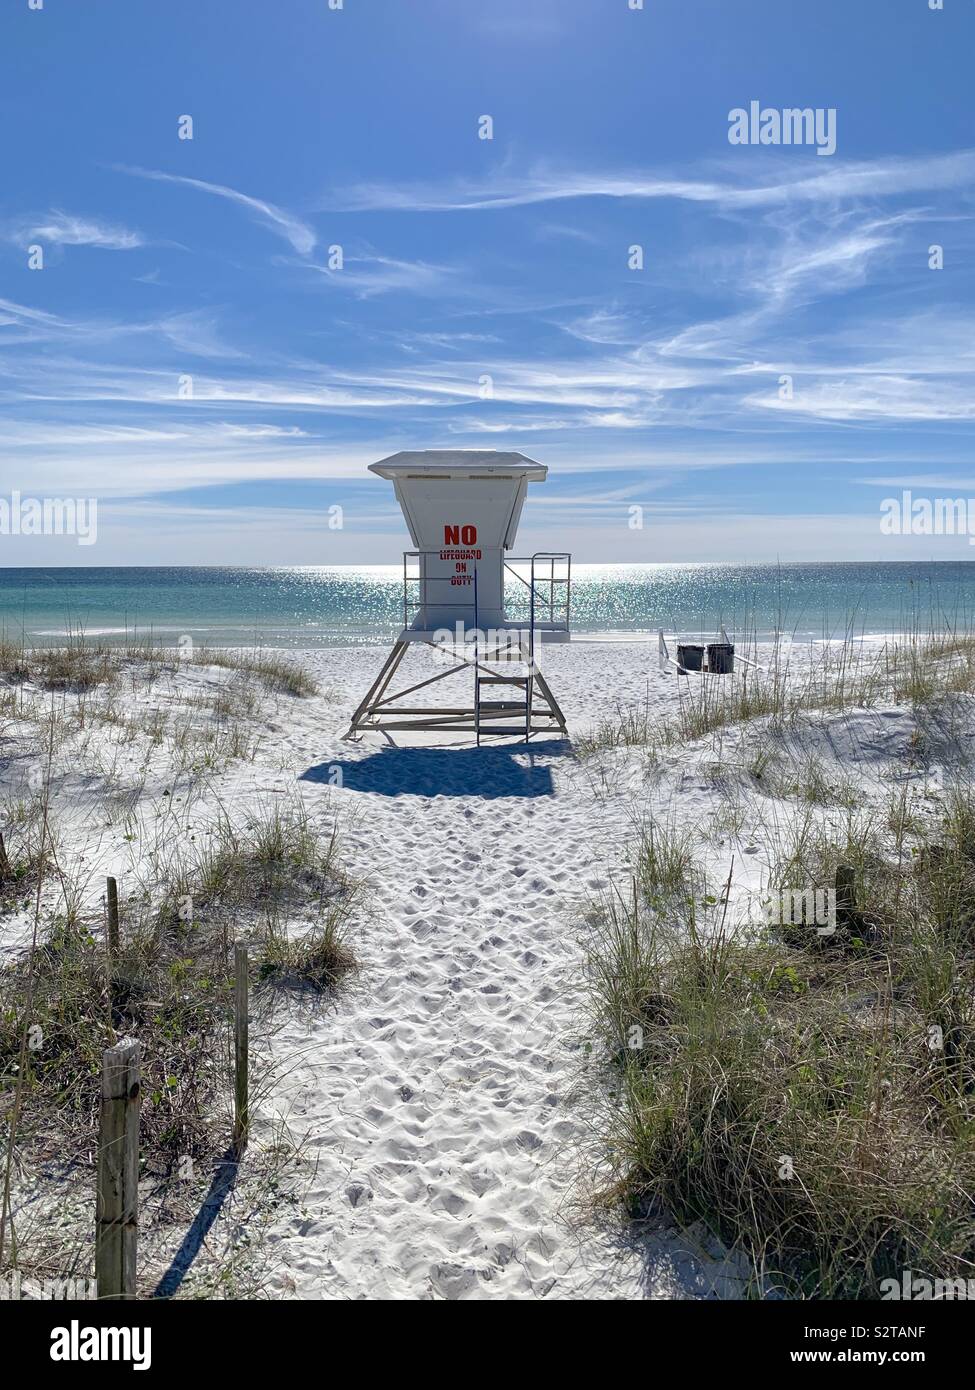 Lifeguard stand on beach with white sand, view of water and blue skies Stock Photo